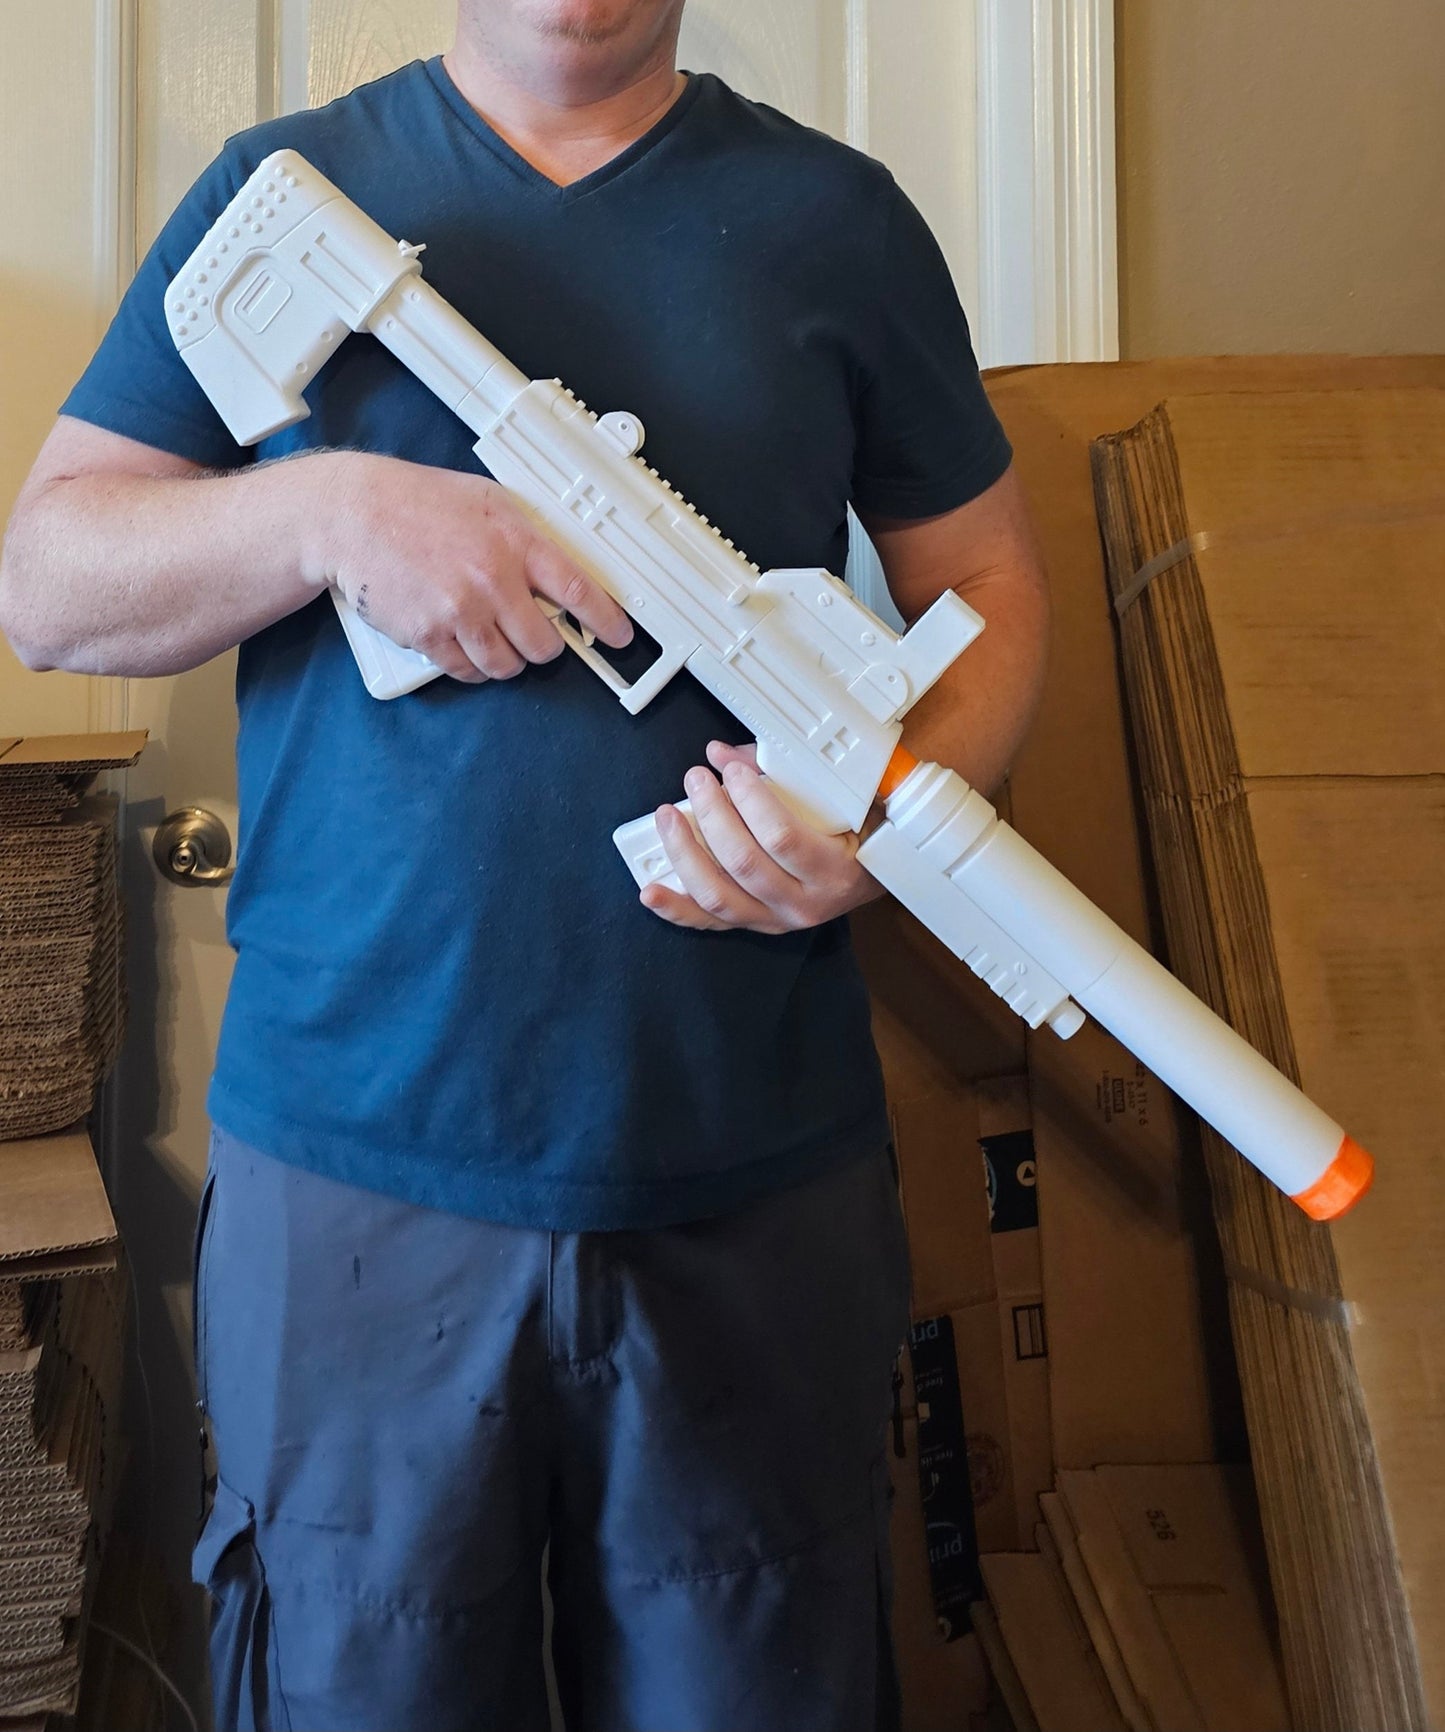 Halo ODST SMG 3D Printed - DIY Cosplay and Collectibles - 3D Printed Full-Size  - Master Chief's Weaponry for Cosplay, Collectors